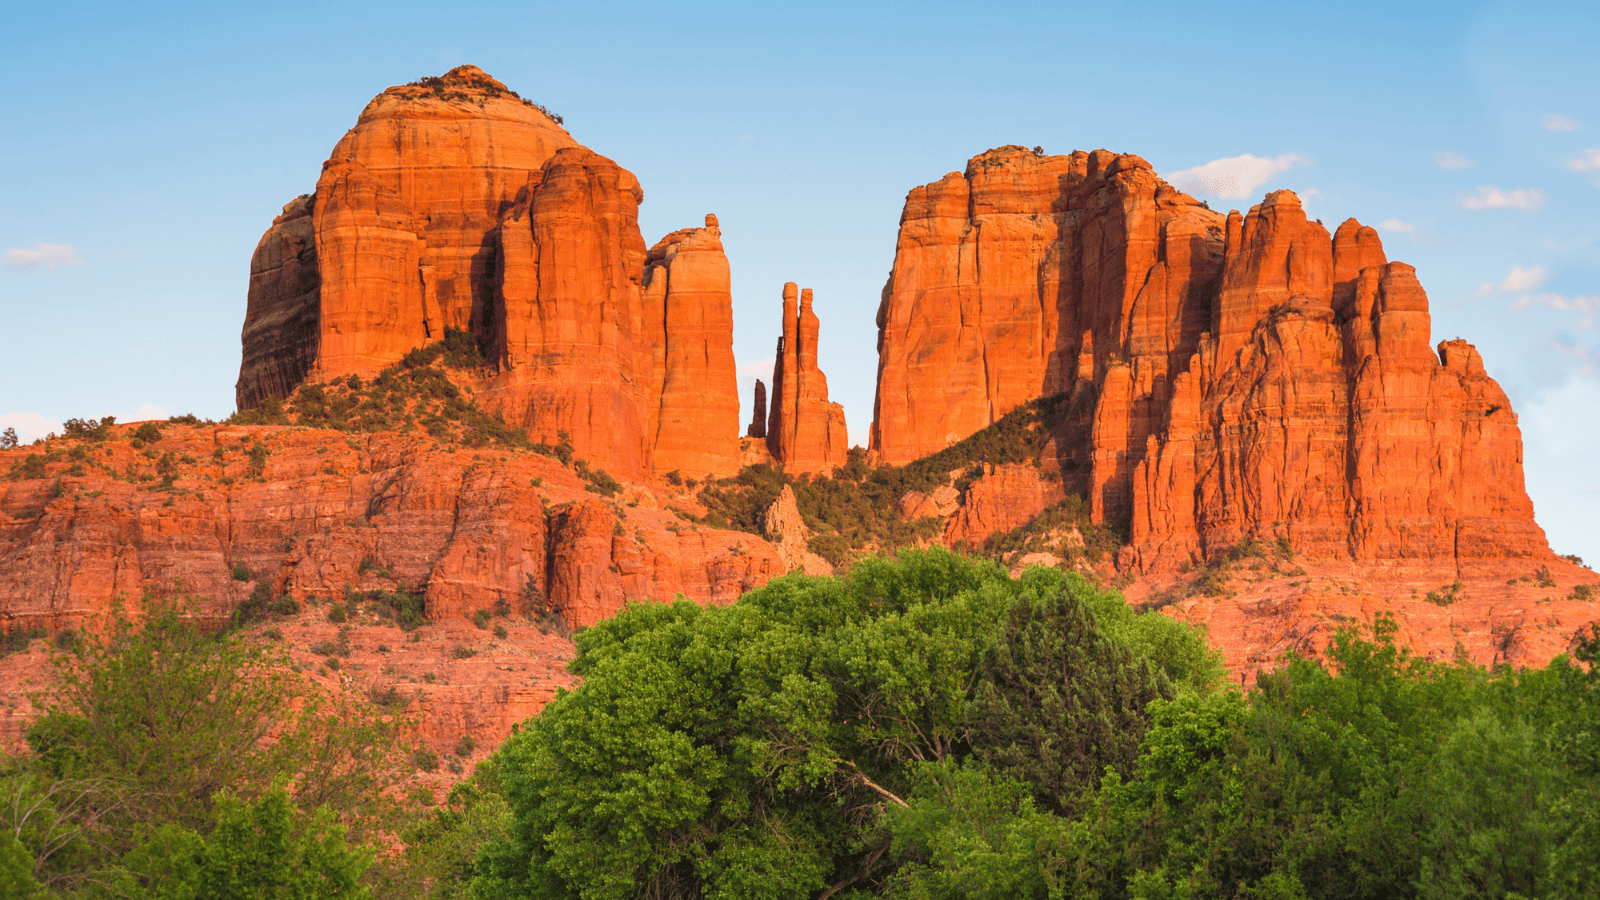 <p><span>When it comes to Sedona, Arizona it often gets overlooked in favor of Phoenix and the Grand Canyon. However, it’s truly a gem that offers scenery and a wide range of activities such, as hiking, spiritual development workshops, and even the Red Rocks Music Festival.</span></p>